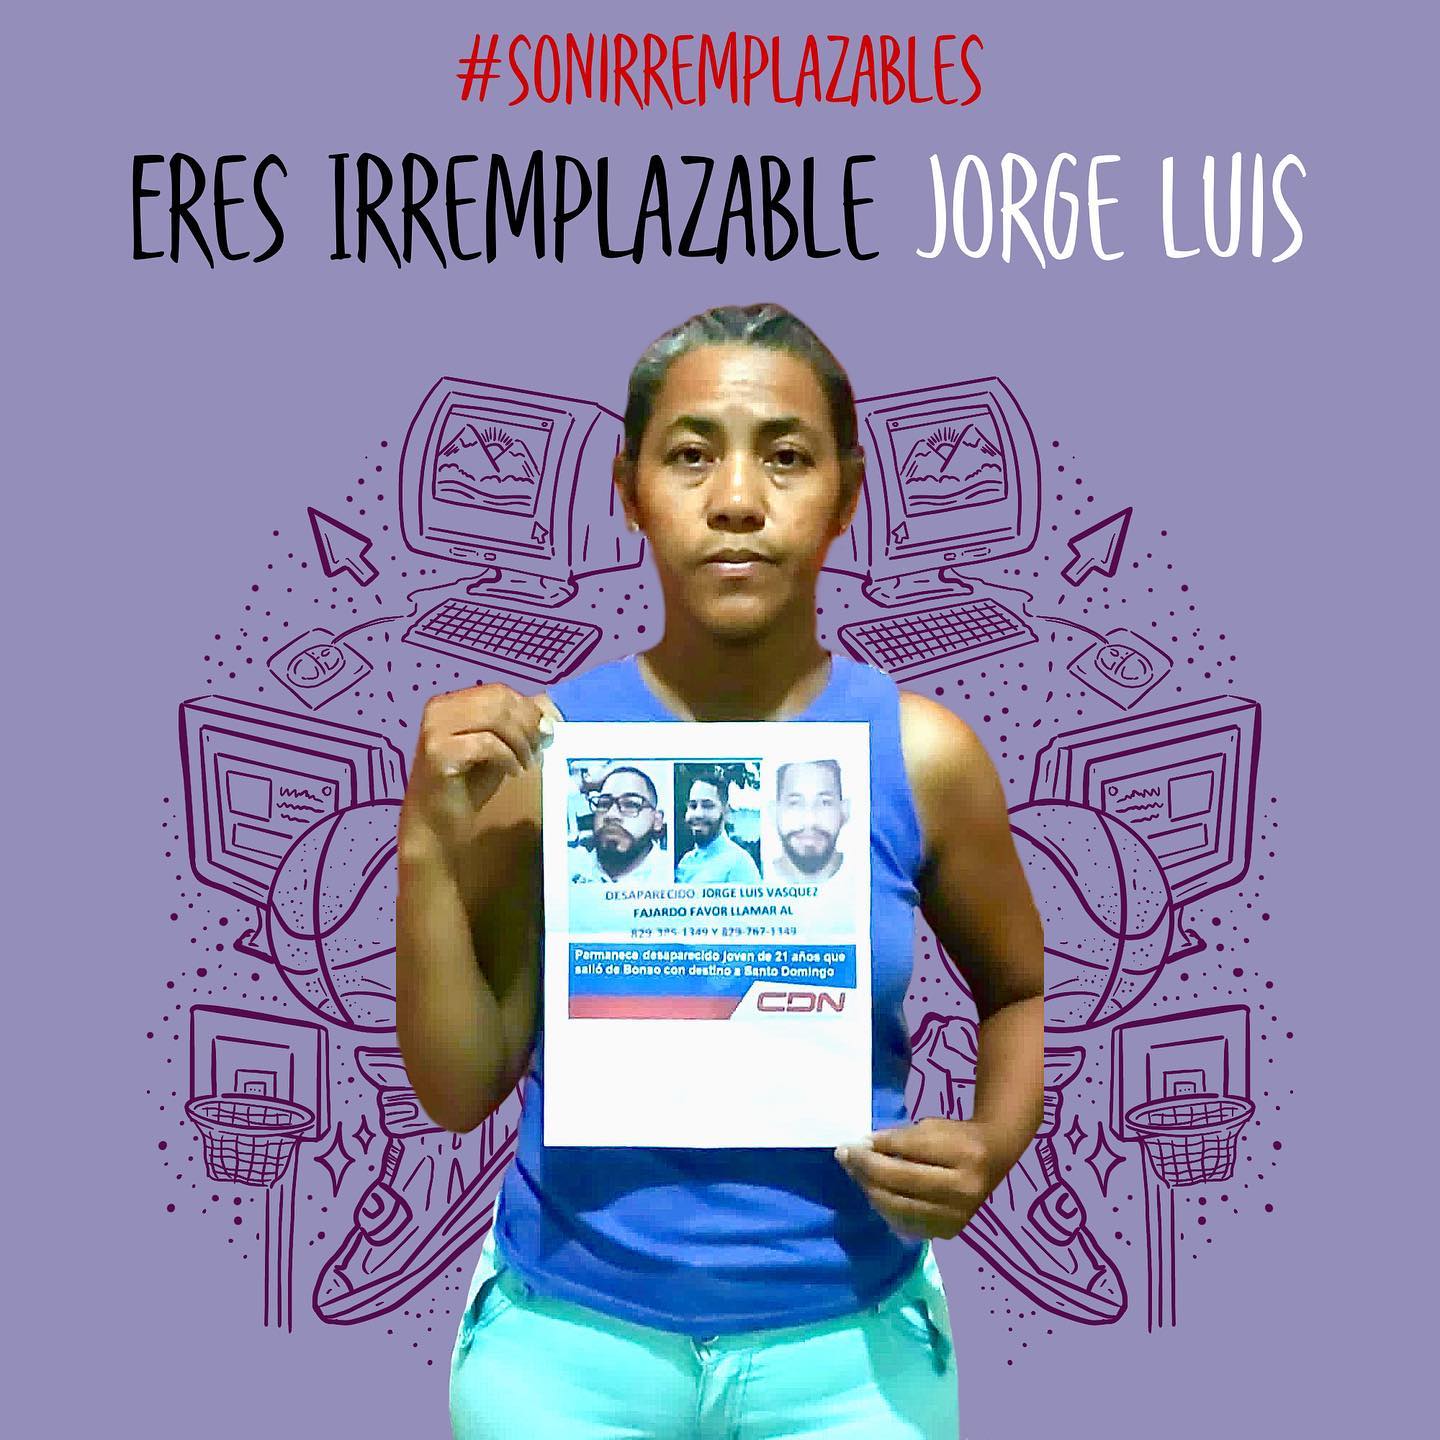 Honorary post for missing person Jorge Luis, a person holding up Jorge Luis's photo against a decorative purple background